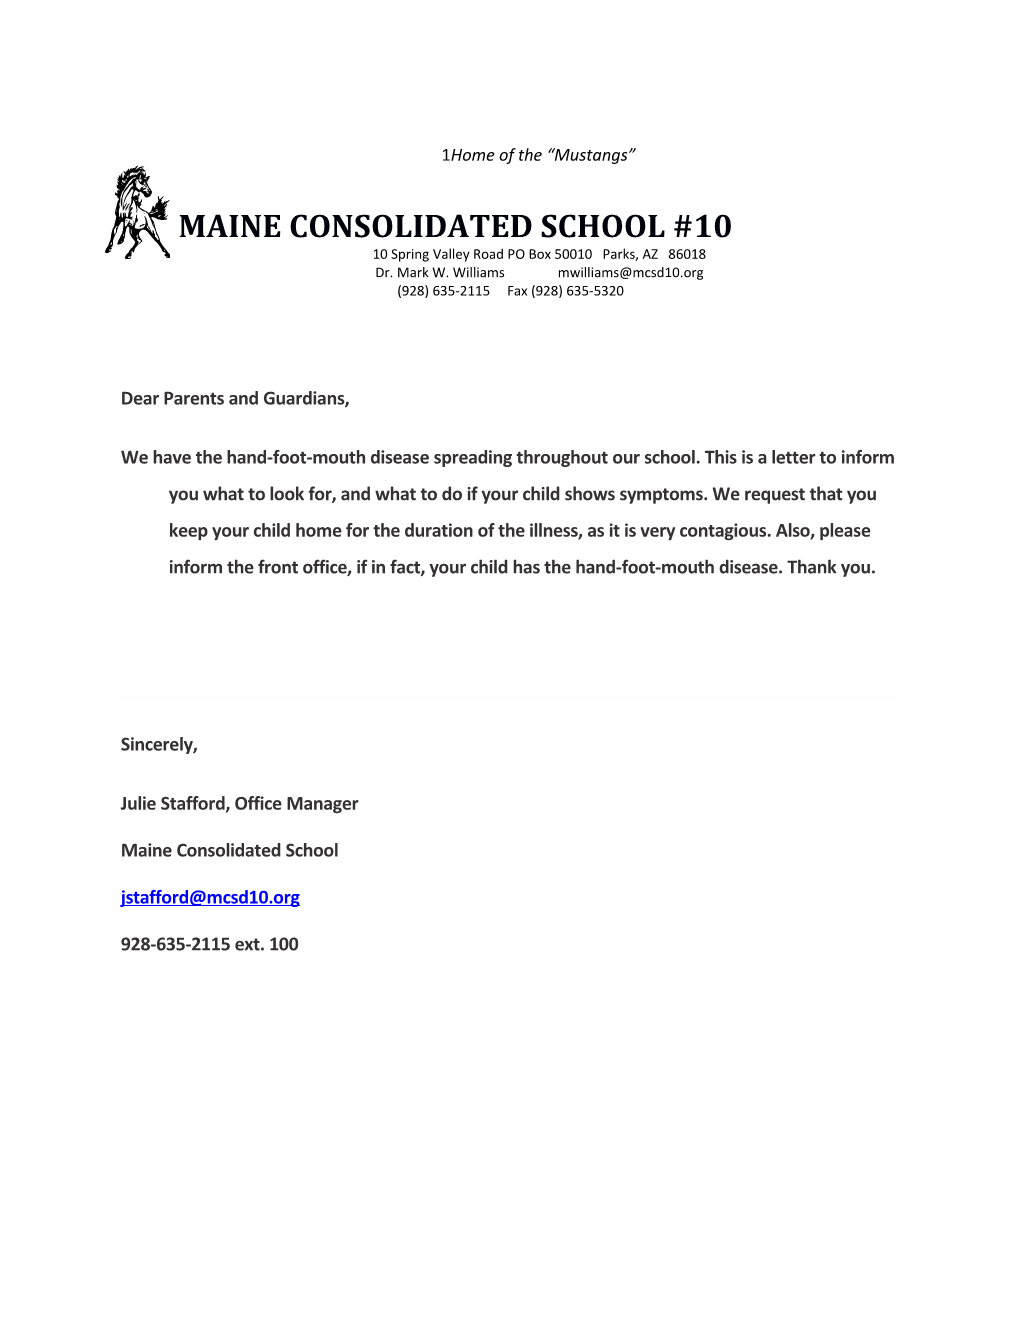 Maine Consolidated School #10